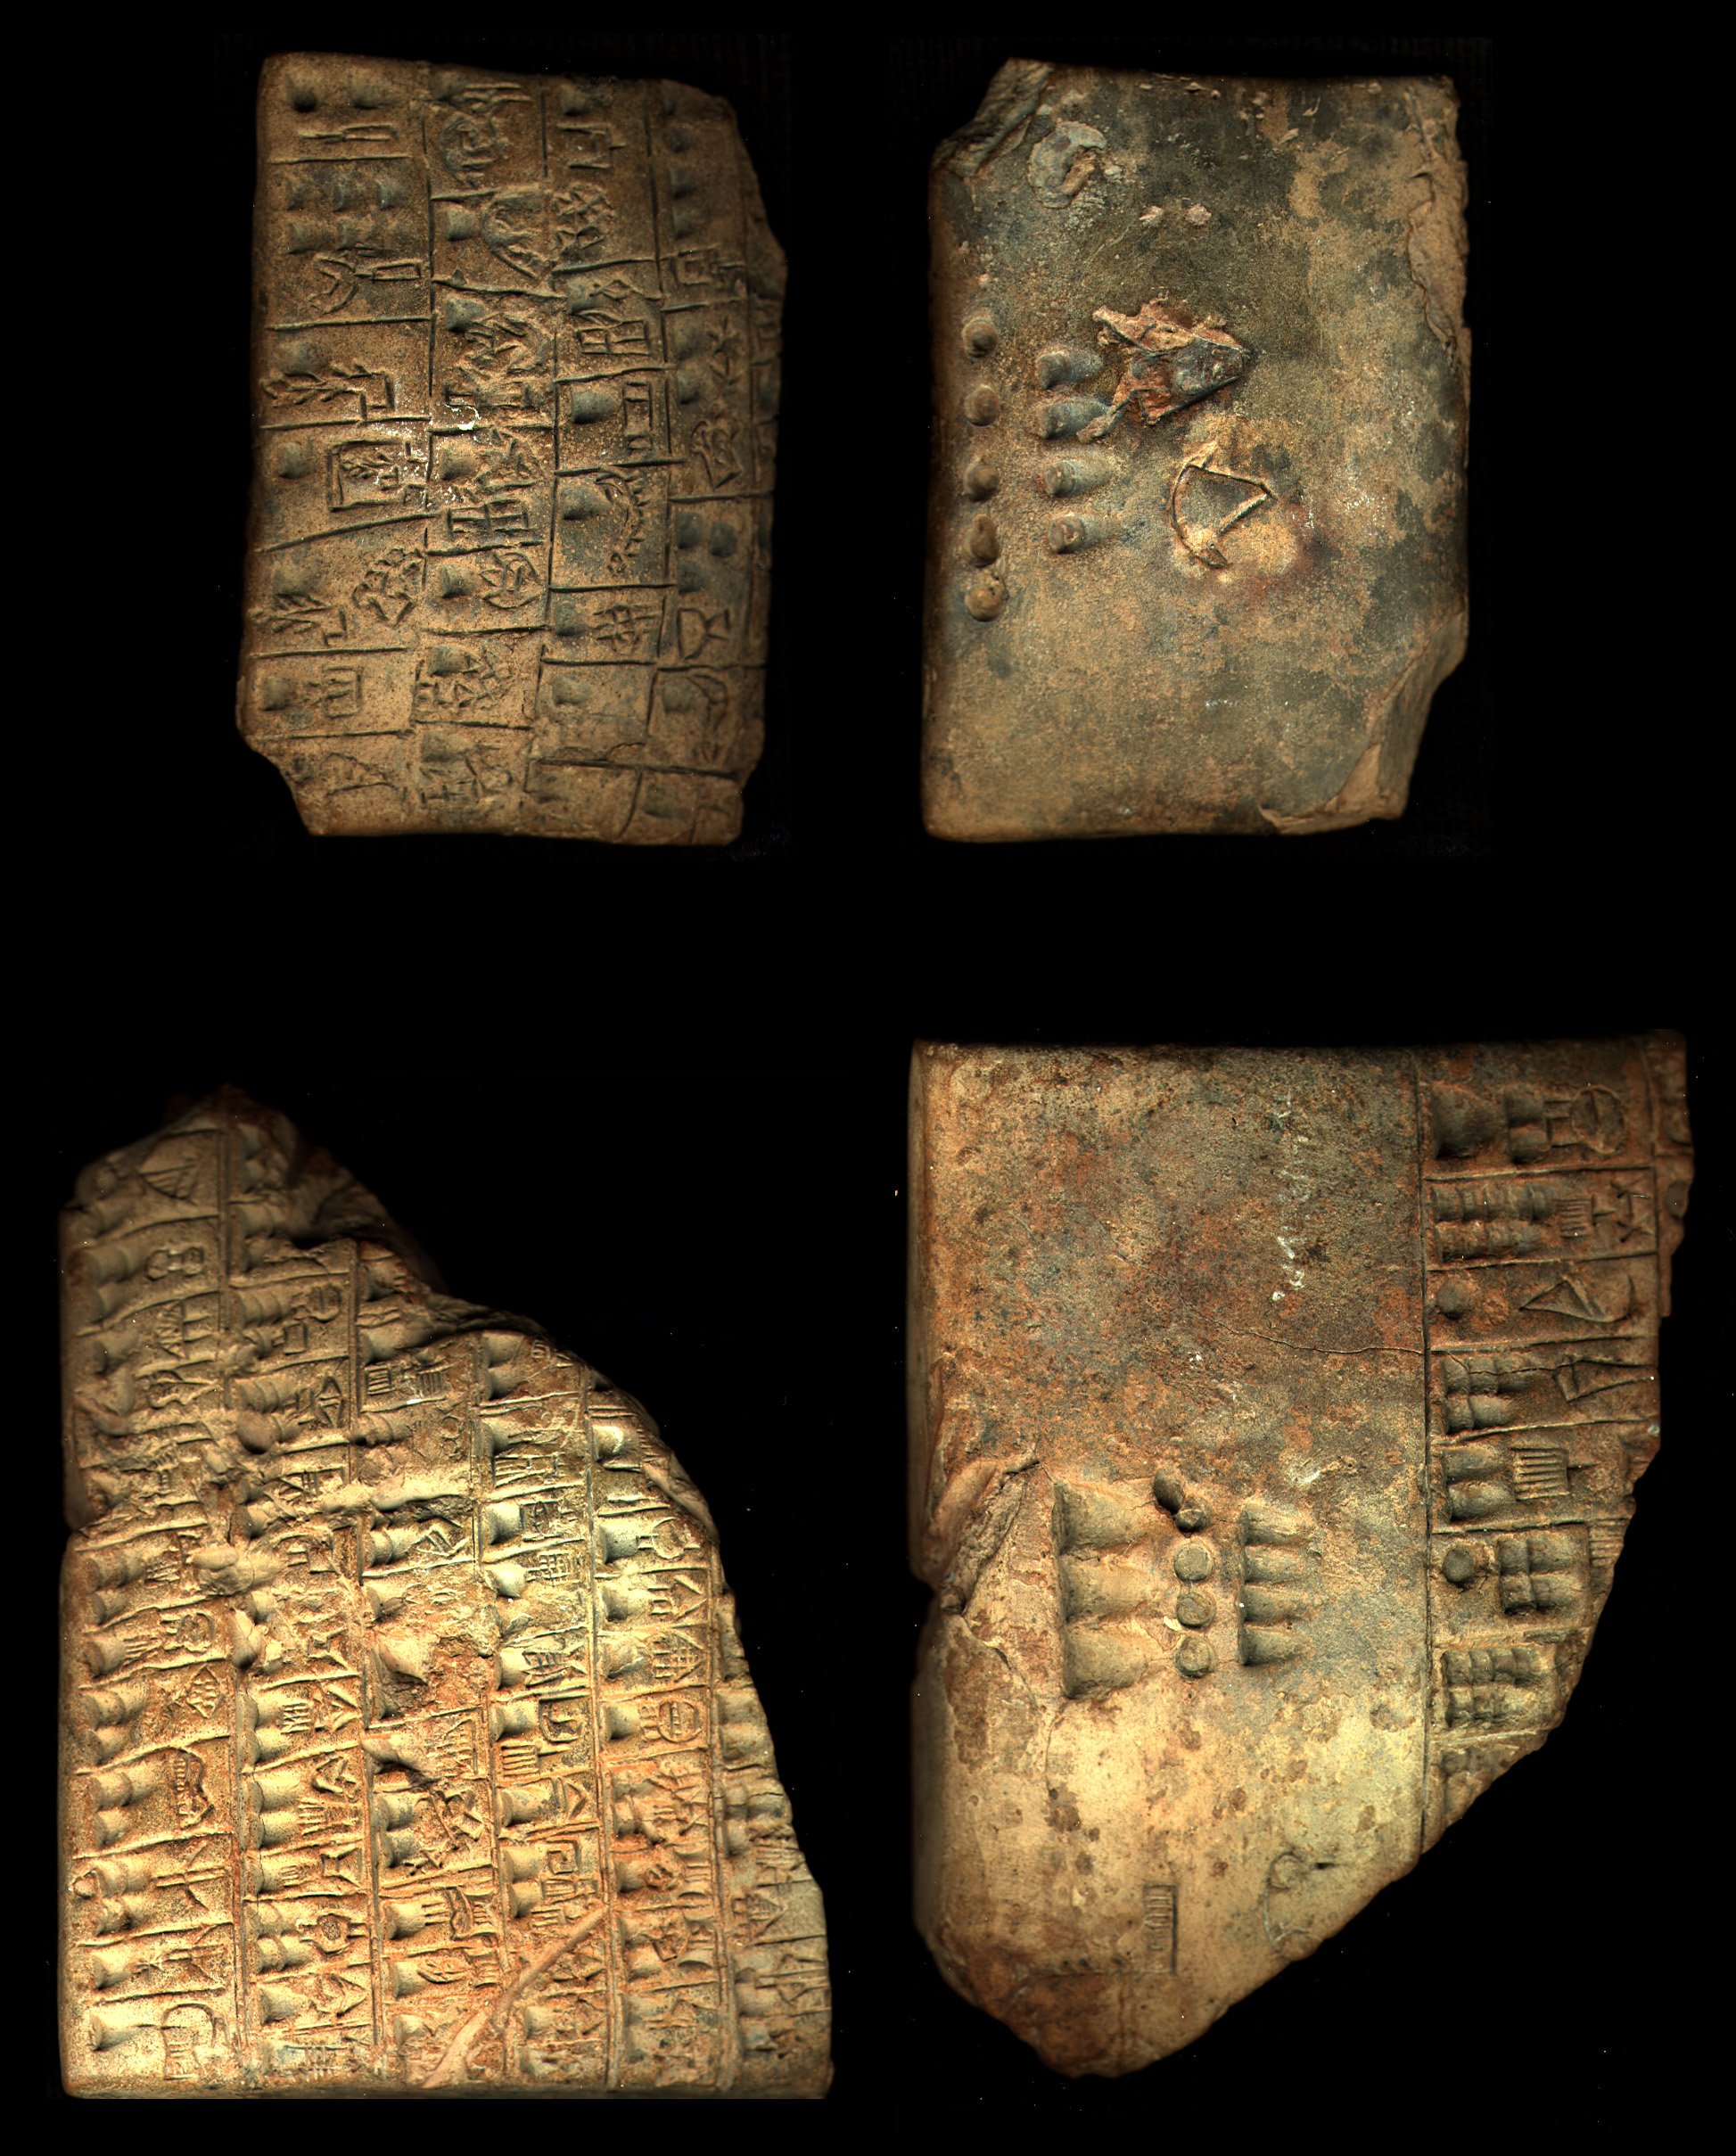 Examples of Uruk IV (above, excavation no. W 7227,a) and Uruk III (below, no. W 14804,a)